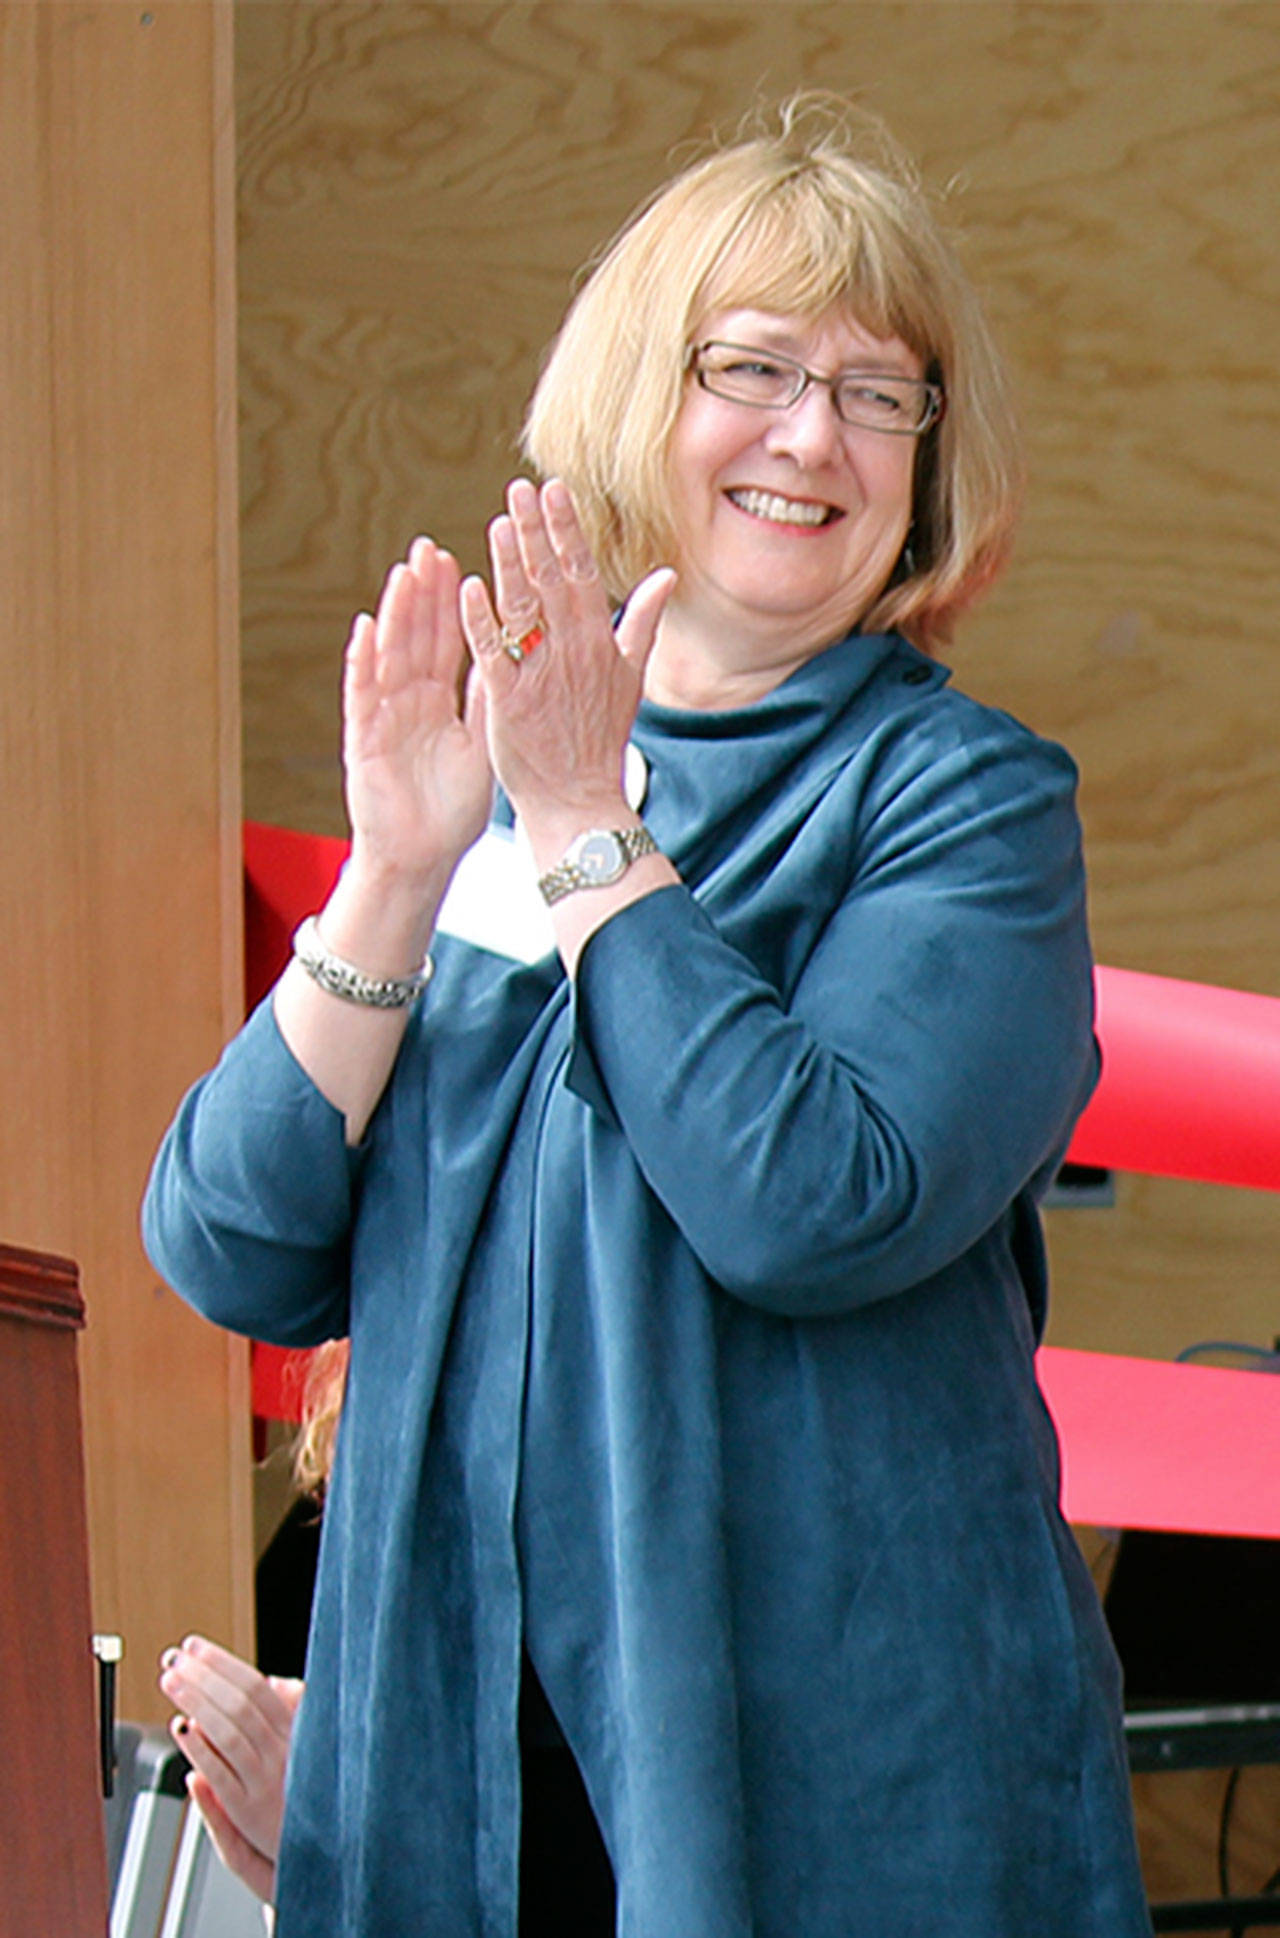 Molly Reed at the opening of the Katherine L White Hall in April 2016. (Len Wolf Photo)